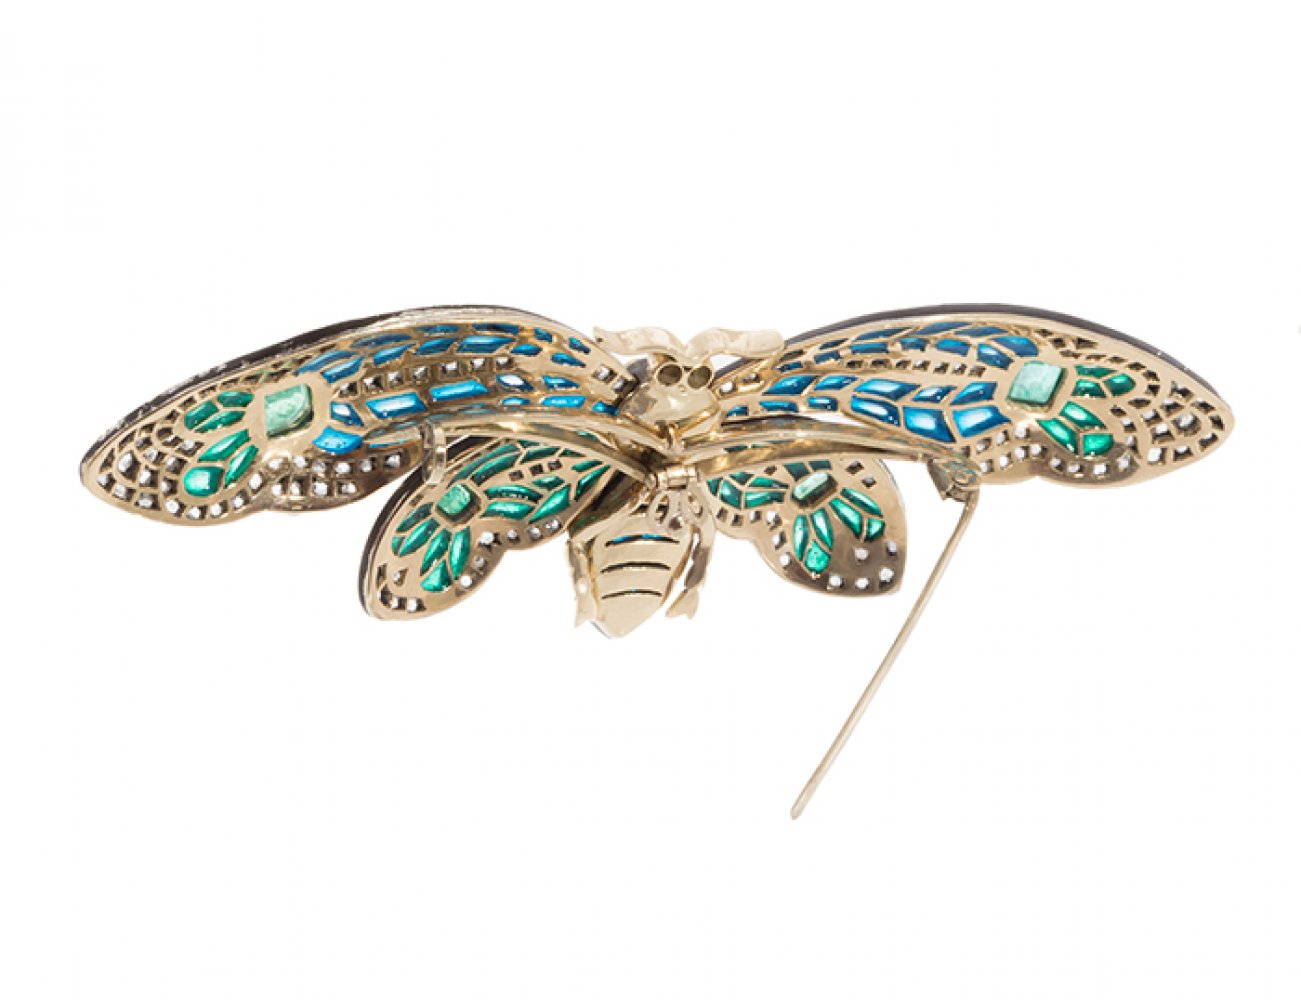 Butterfly-shaped brooch, modernist style, 20th century. In 18k yellow gold with silver views. - Image 2 of 3